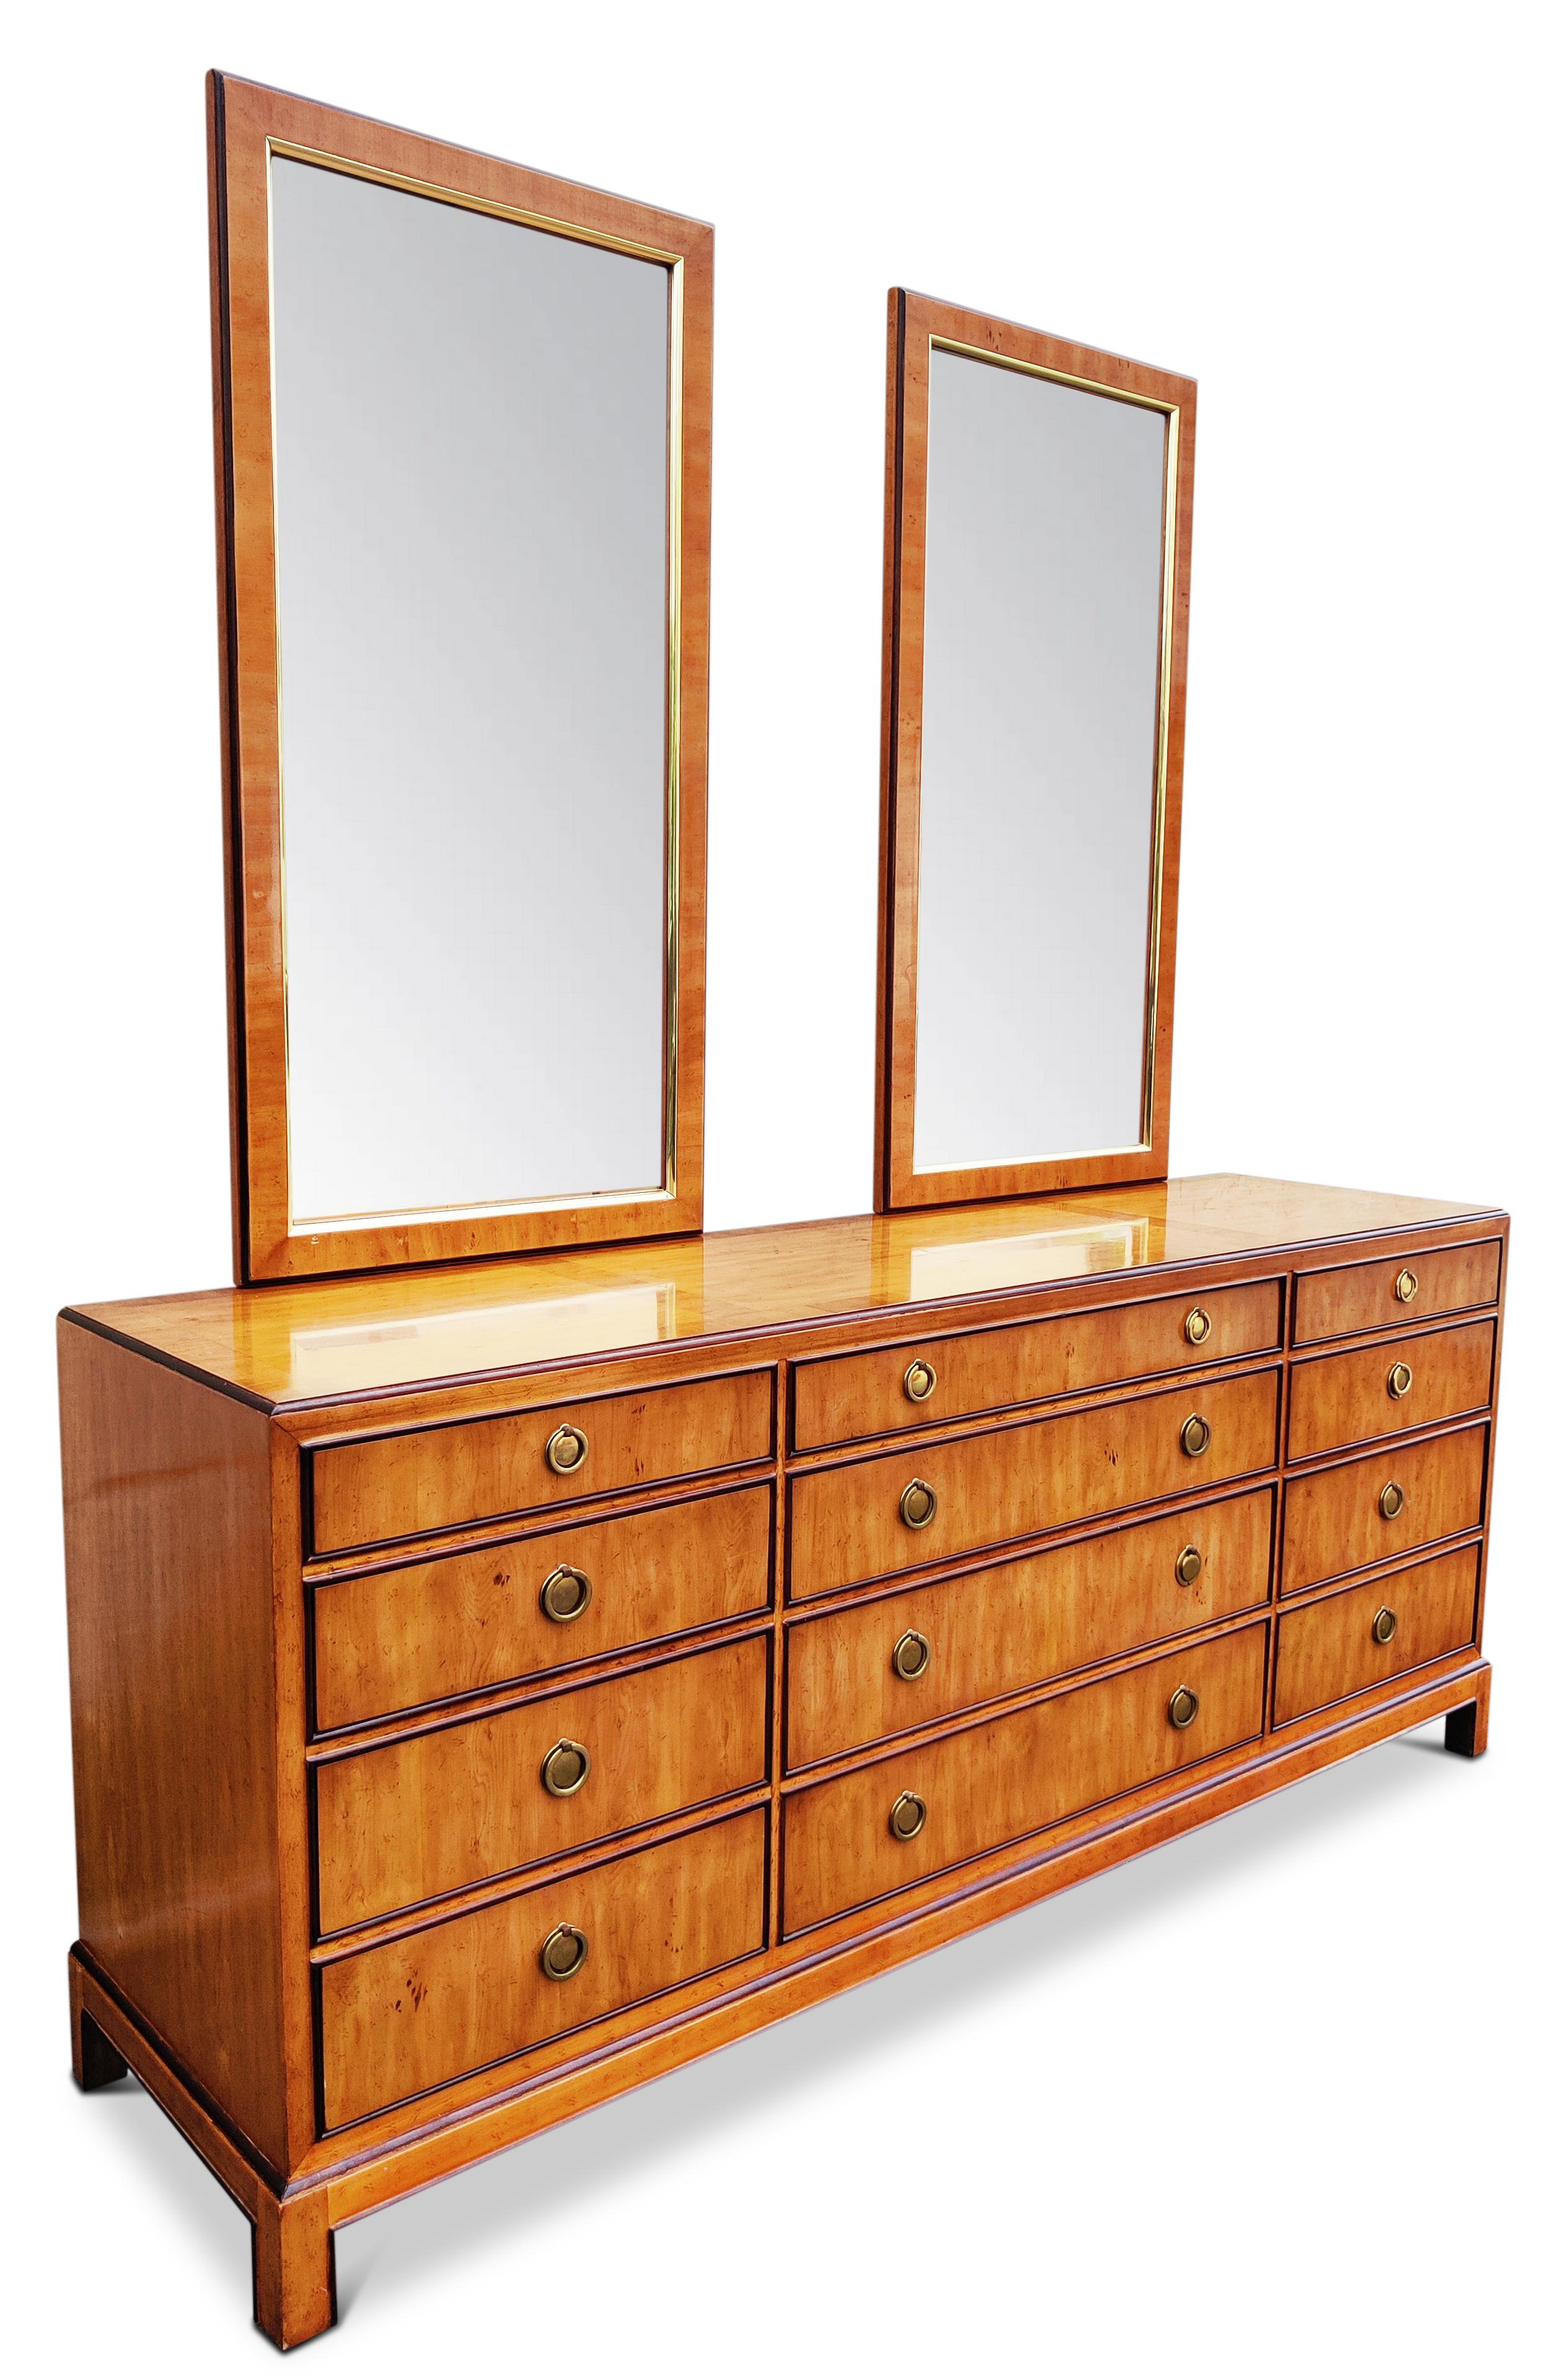 This beautiful dresser was made in the 1970s by Drexel Heritage for their 